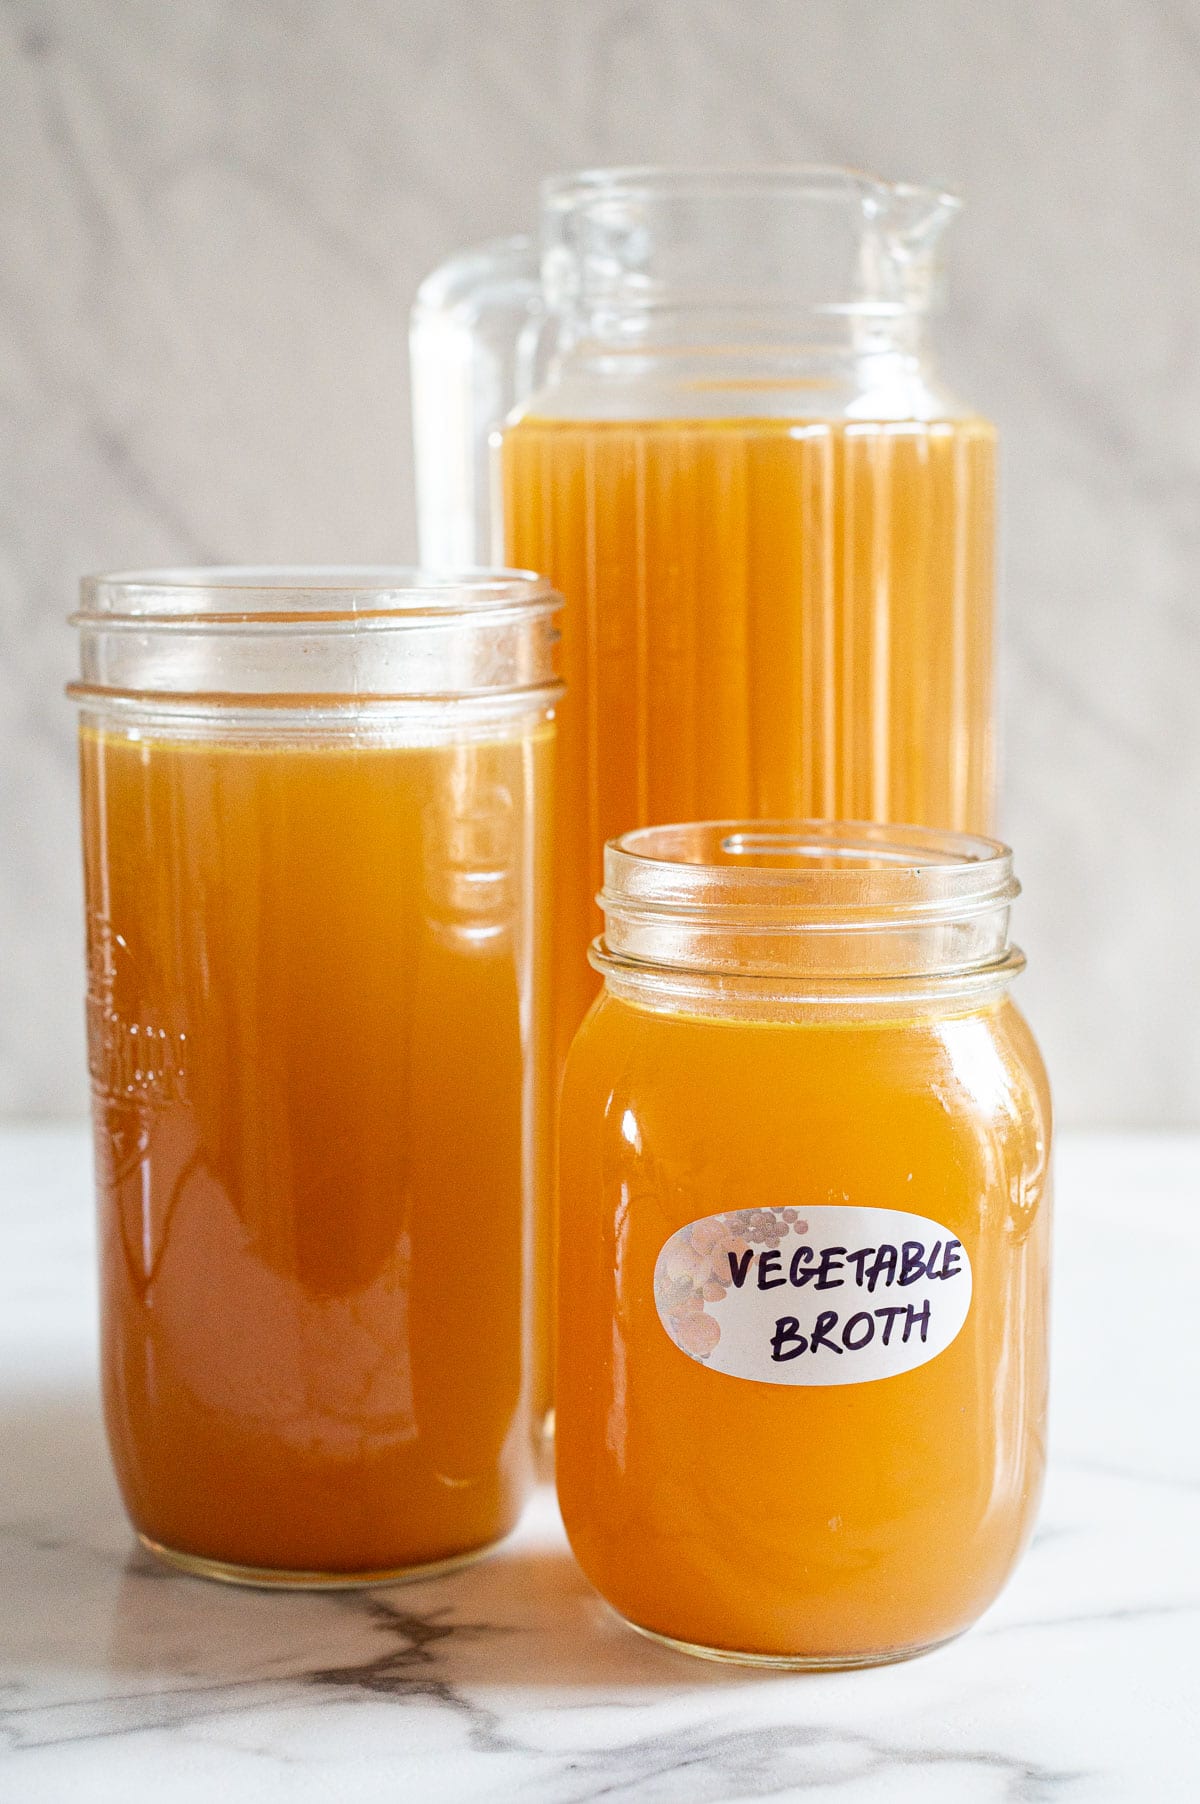 Homemade vegetable broth in three glass jars and one of them labeled.